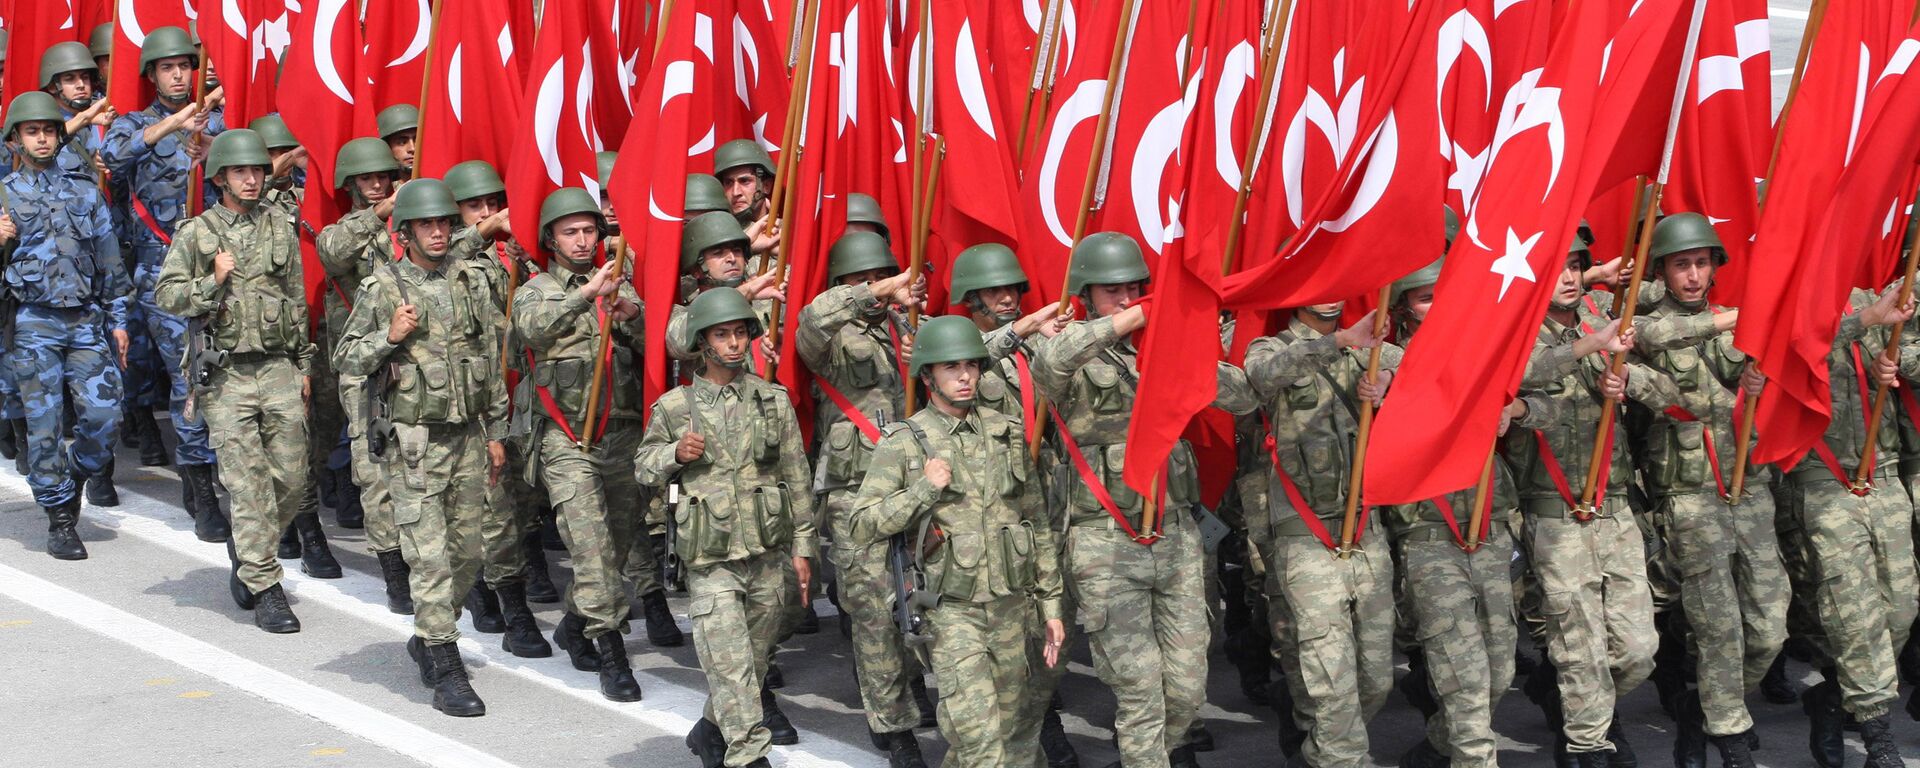 Troops parade with Turkish flags in Ankara during celebrations for the 91st anniversary of Victory Day. File photo. - Sputnik International, 1920, 21.06.2022